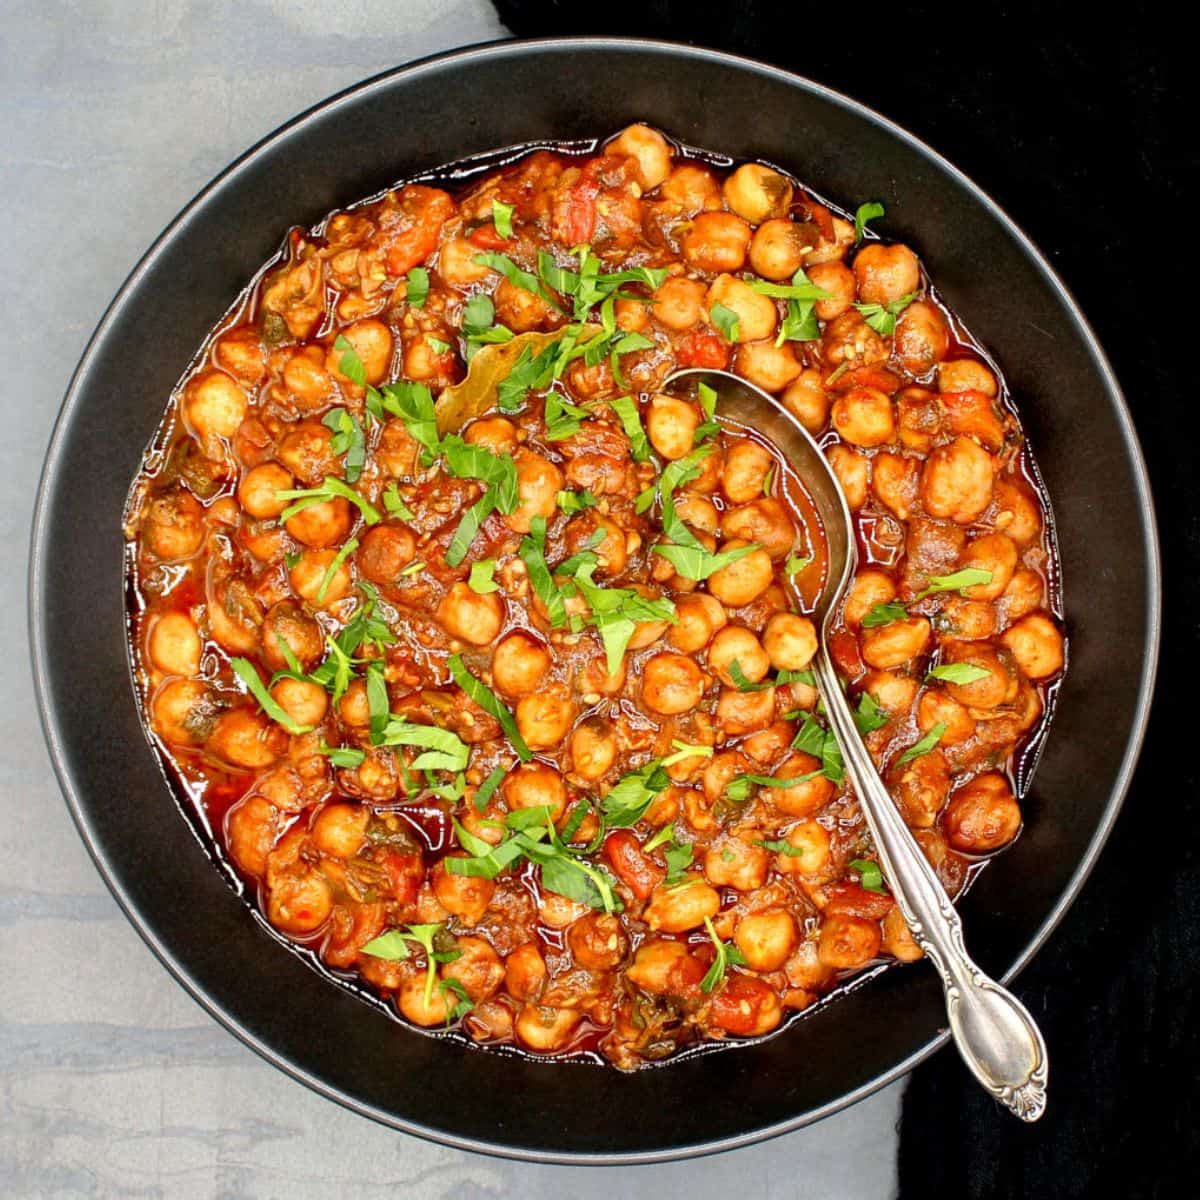 Lebanese chickpea stew in black bowl with spoon.